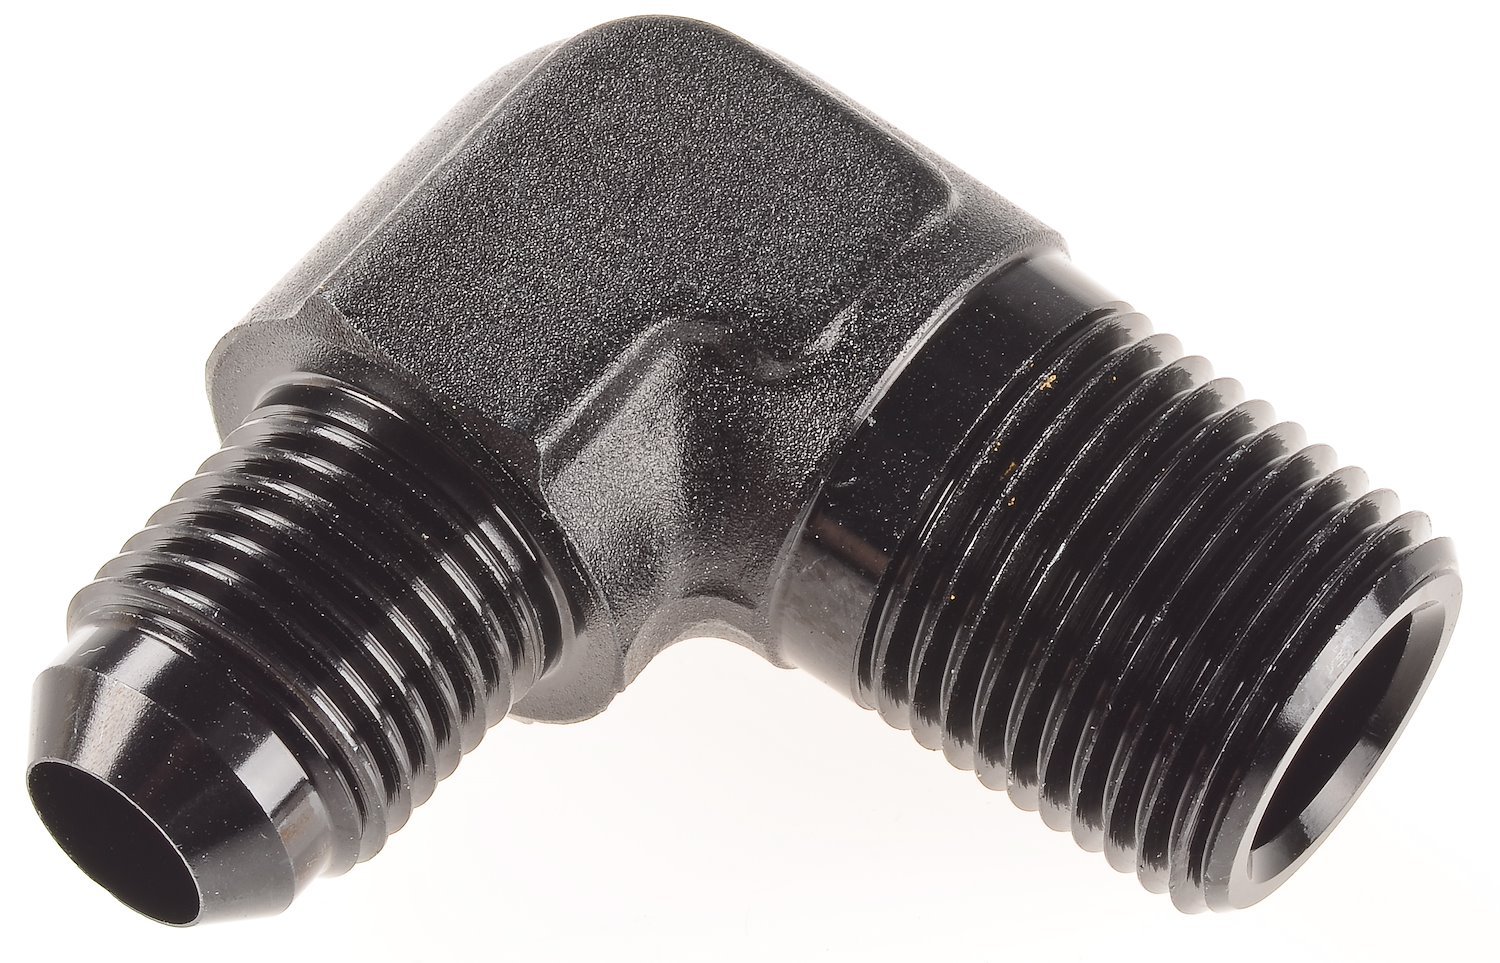 AN to NPT 90-Degree Adapter Fitting [-6 AN Male to 3/8 in. NPT Male, Black]